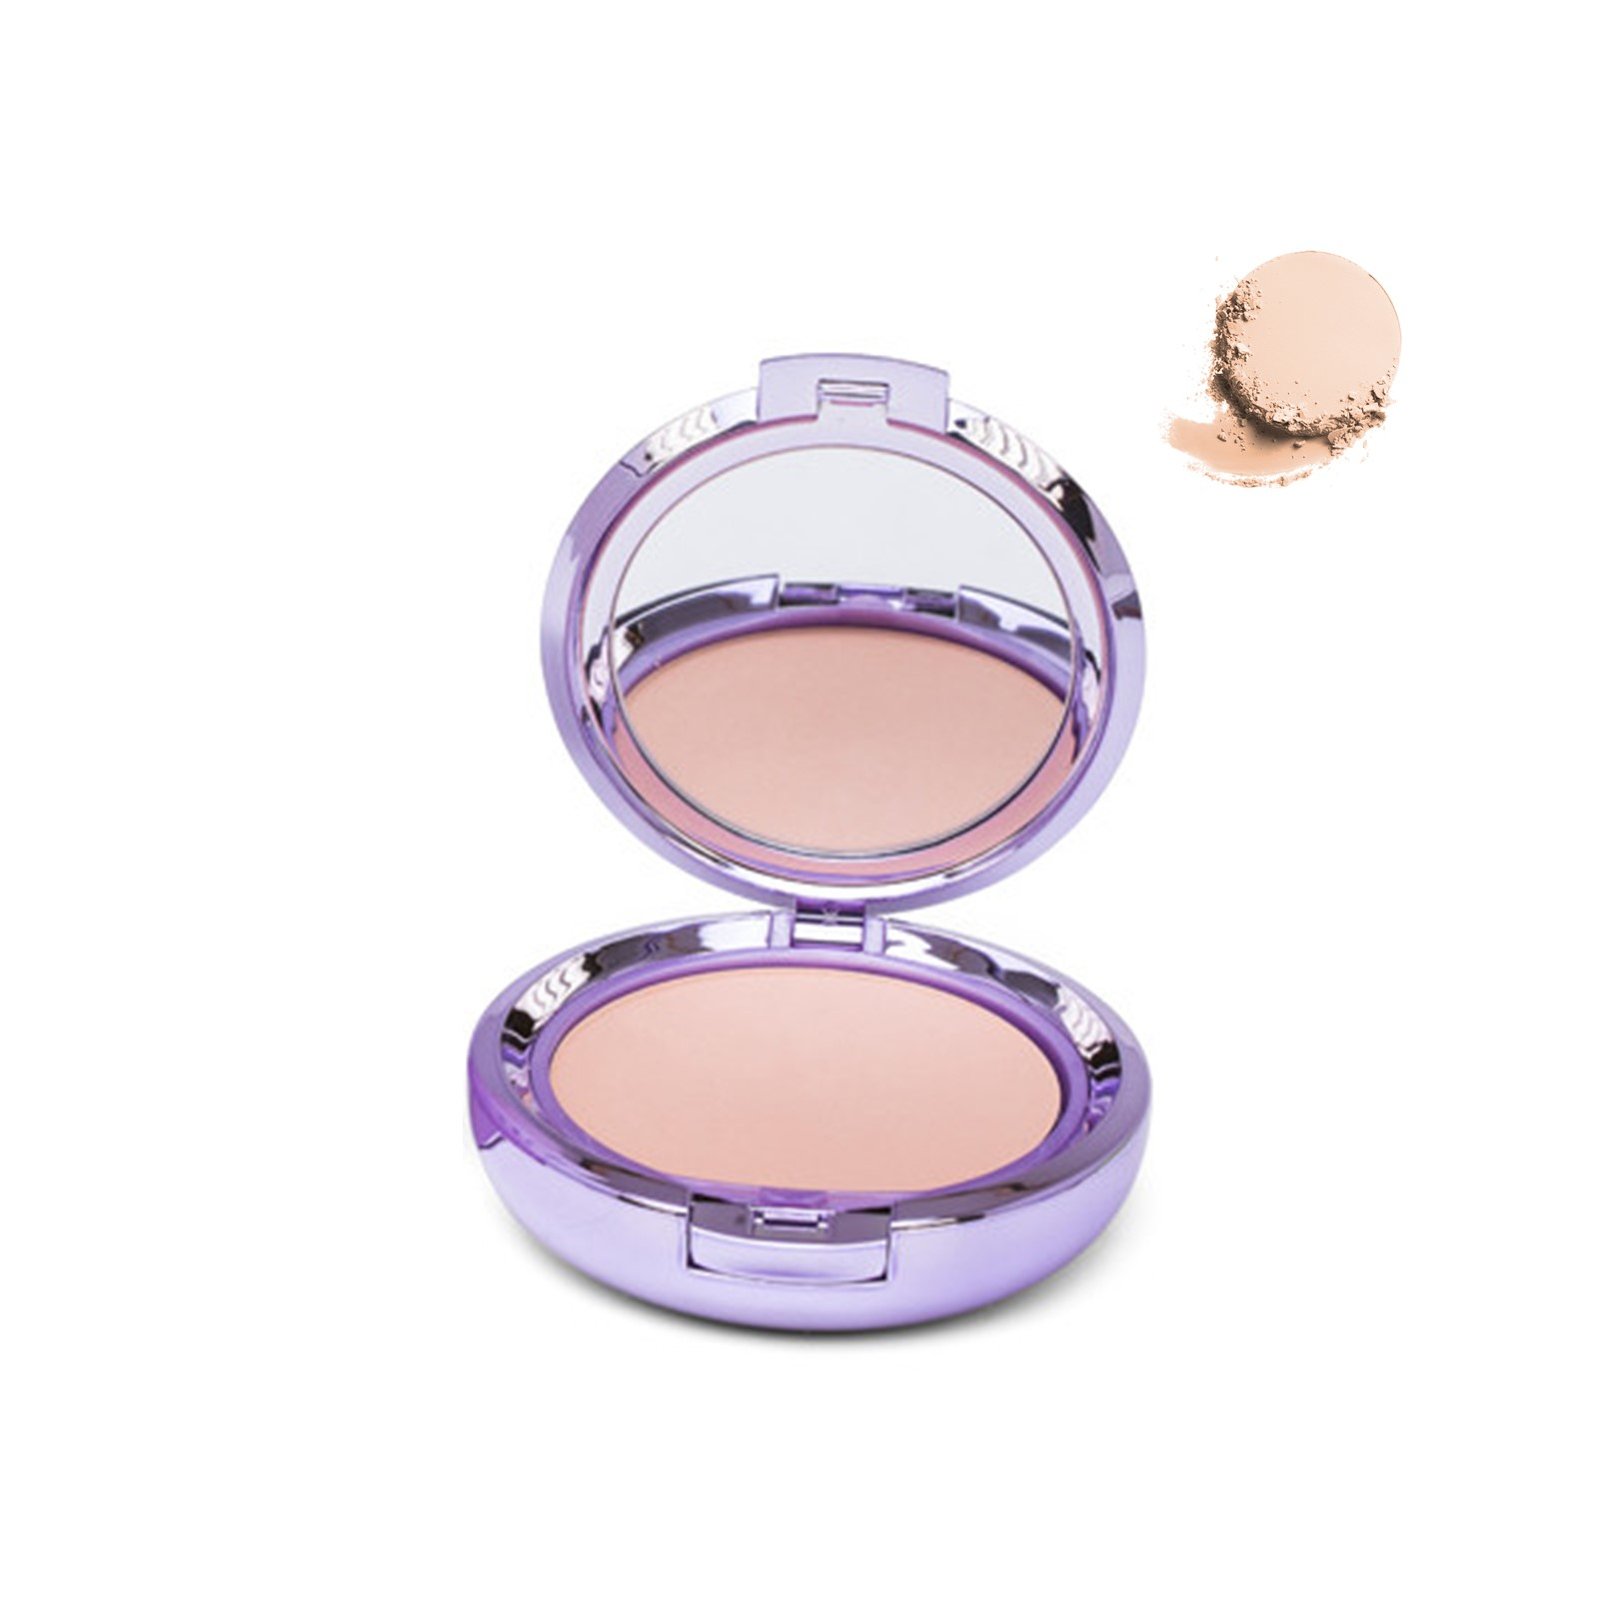 Covermark Compact Powder Oily-Acneic Skin 1A 10g